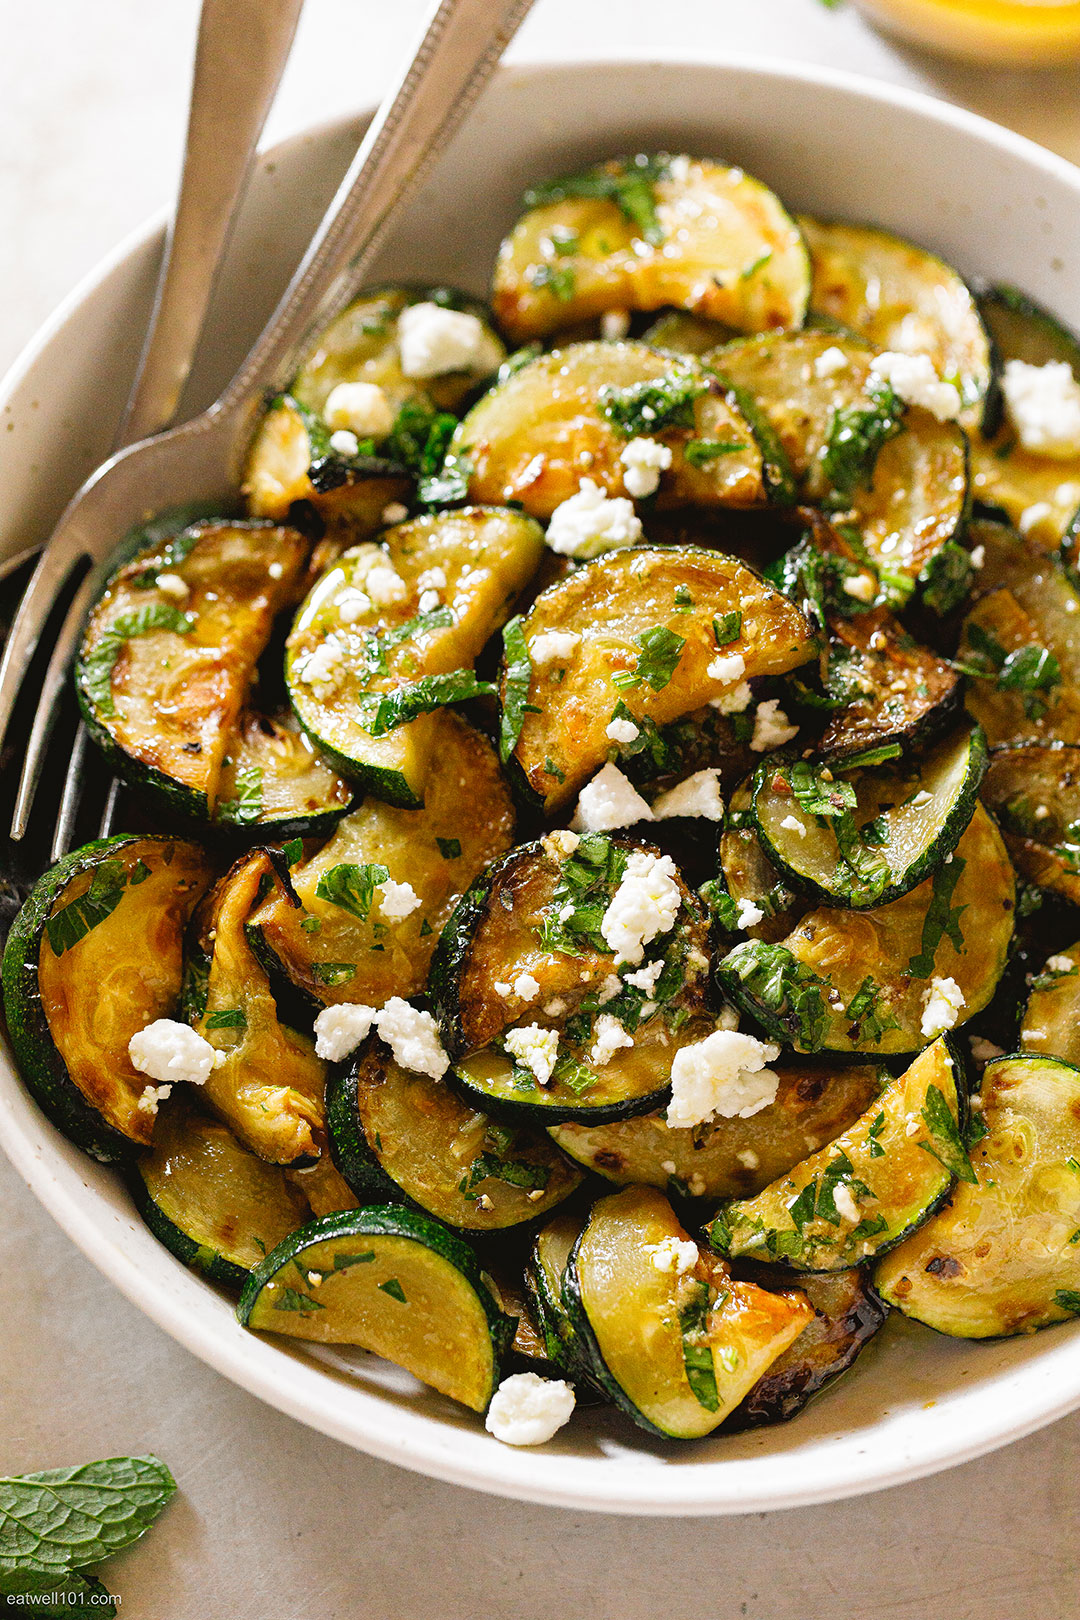 Roasted Zucchini Salad Recipe with Feta and Italian Dressing – How to